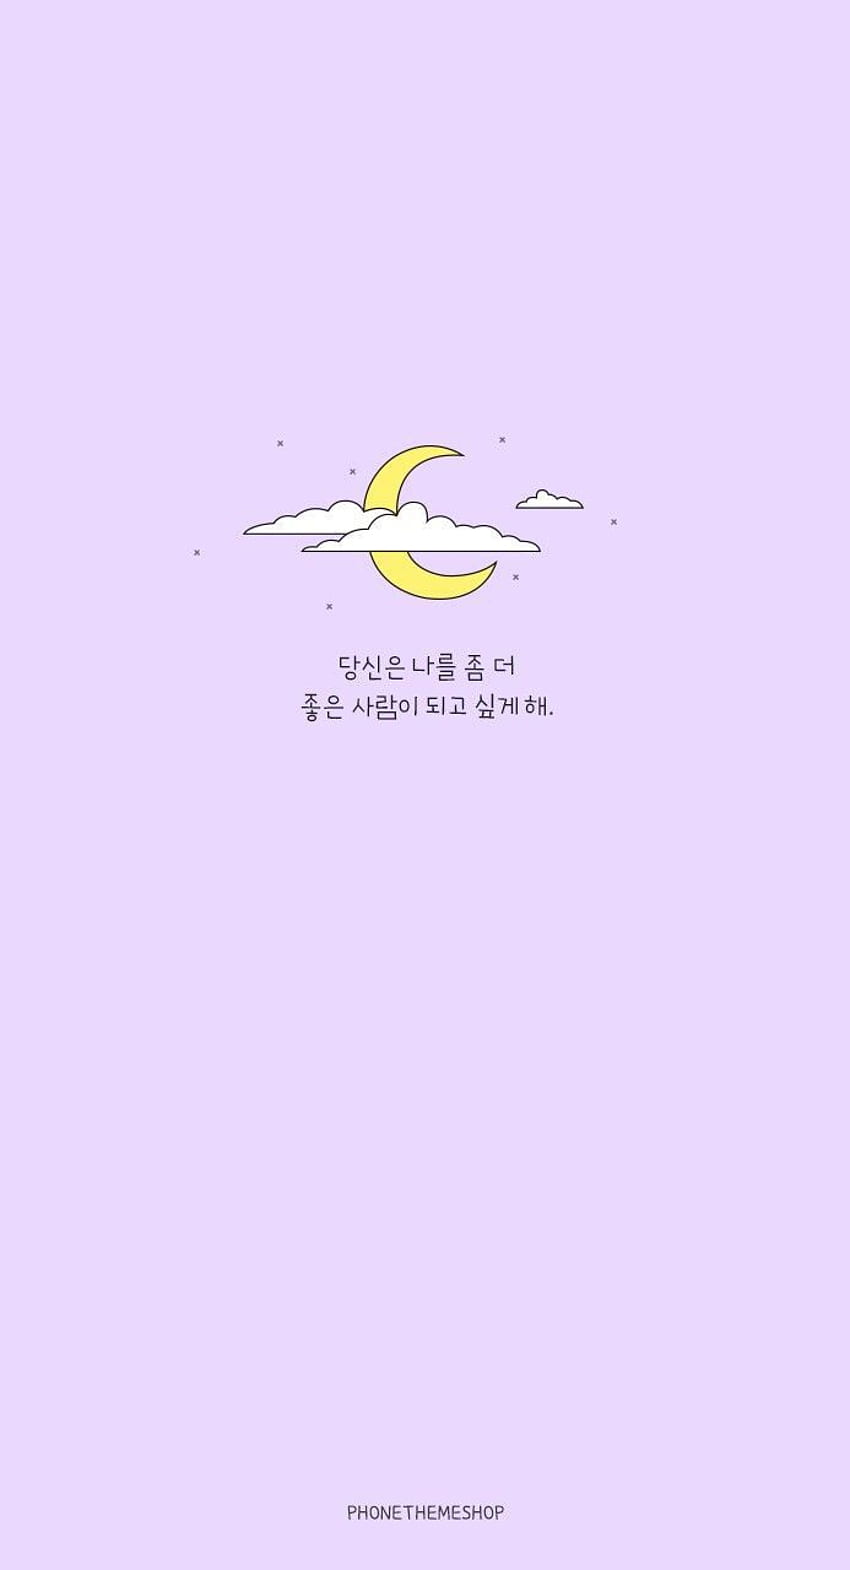 A cute korean moon and clouds on pink background - Korean